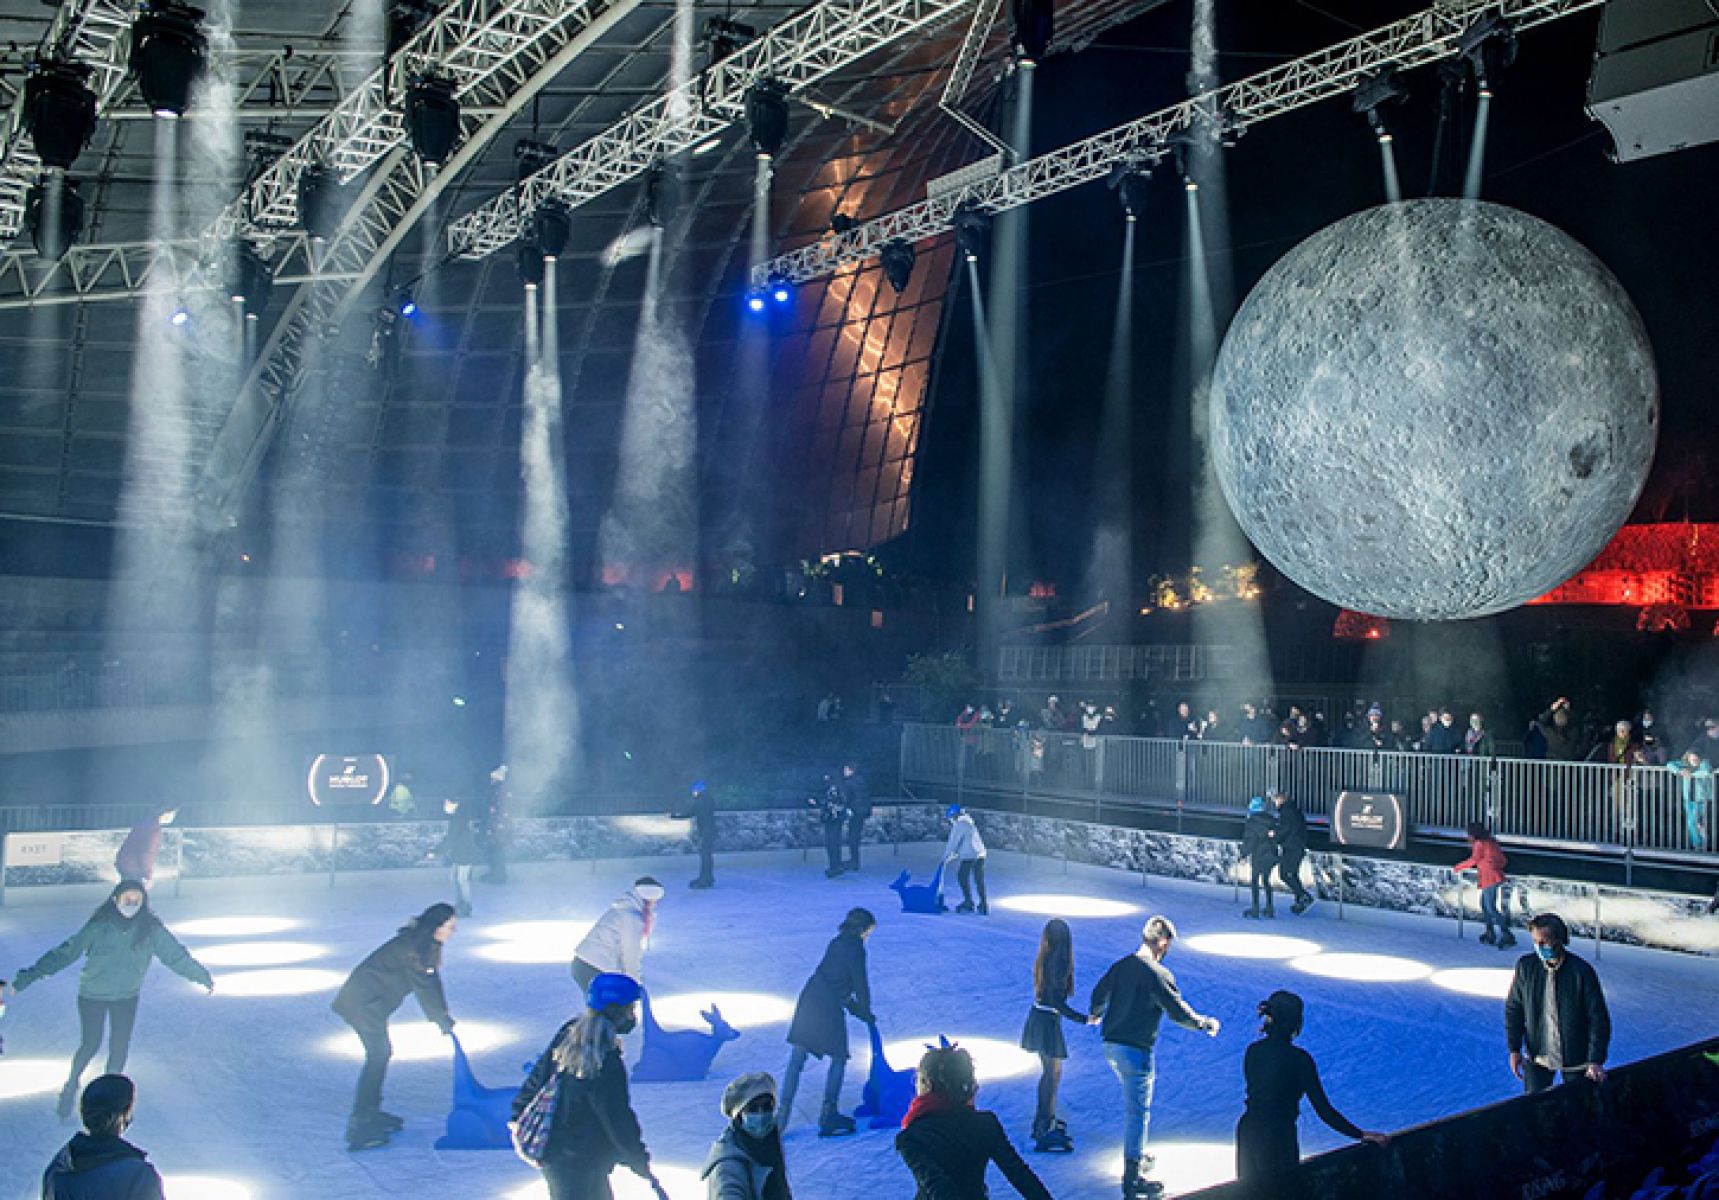 Image shows an illuminated ice ring with a full moon hovering behind it.  People skate on the ring at night time in Melbourne as part of the festival.